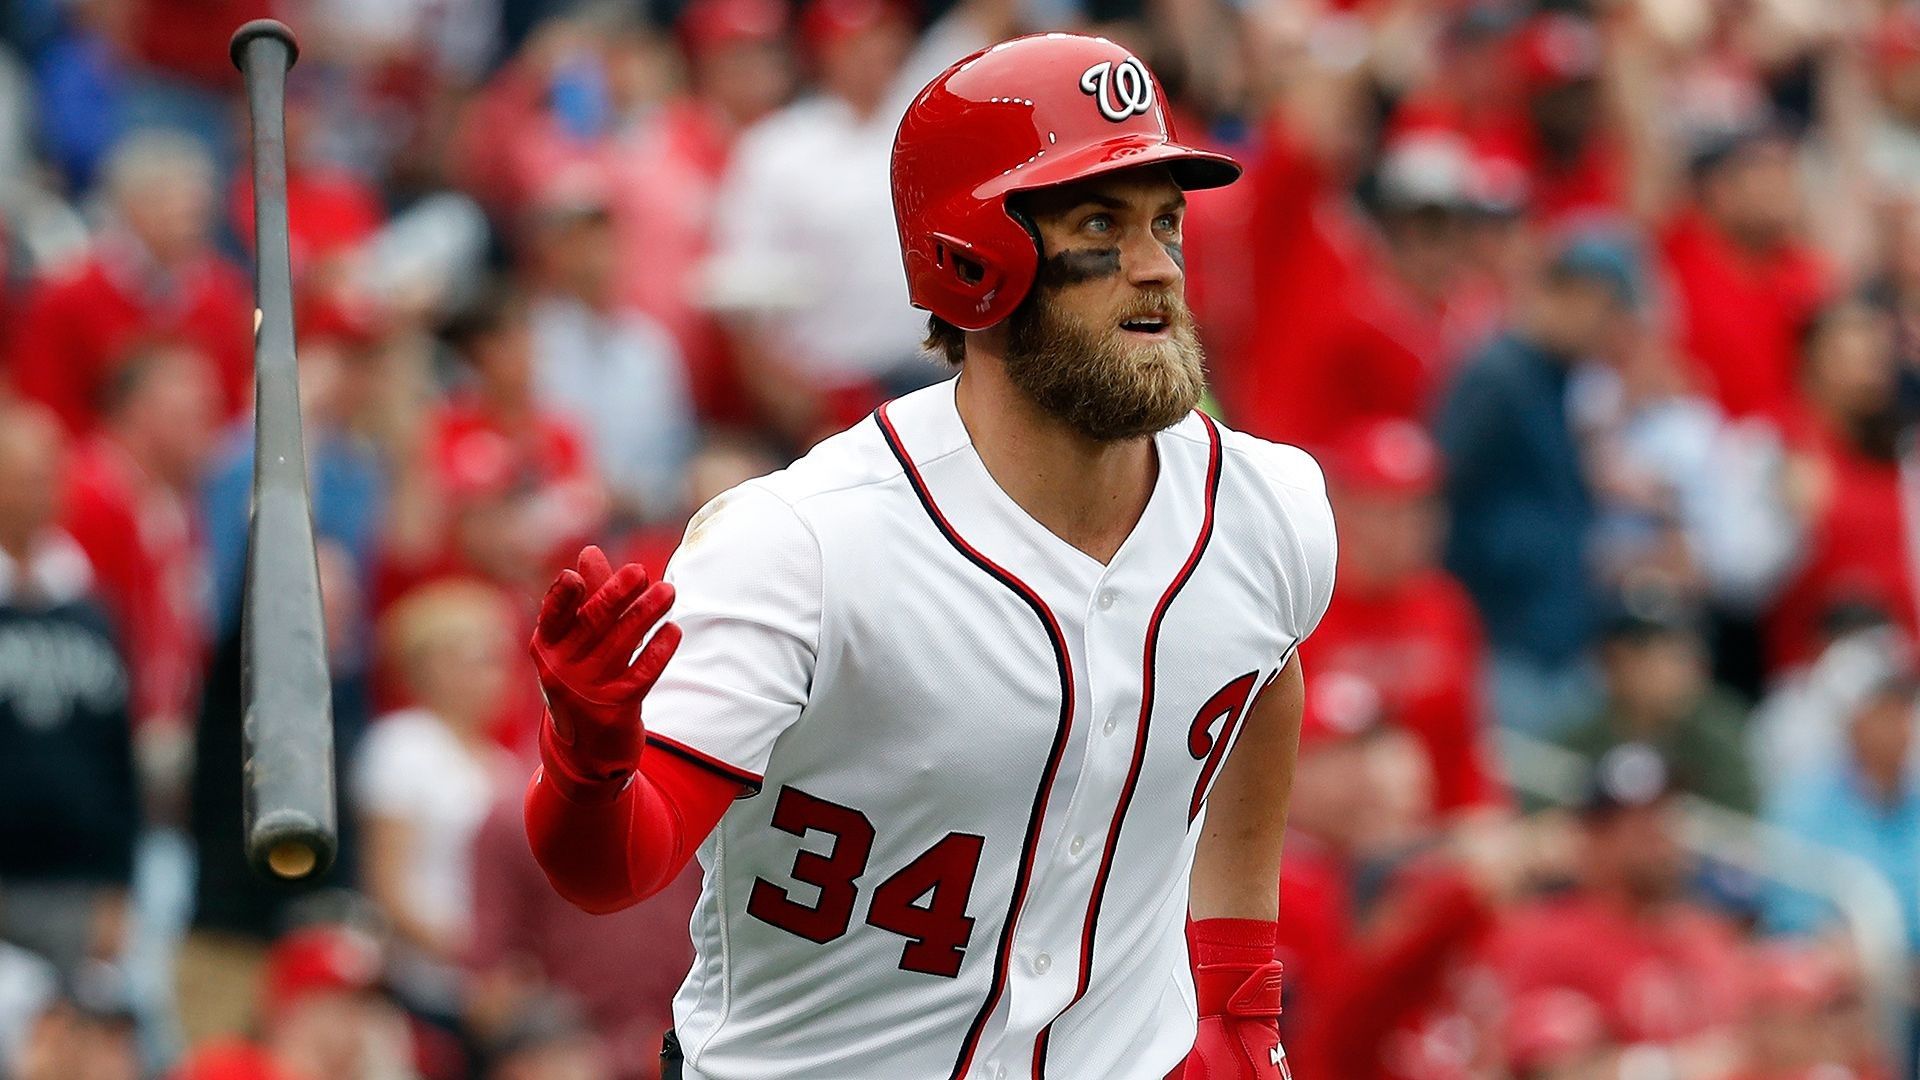 Bryce Harper Wallpaper - Download to your mobile from PHONEKY